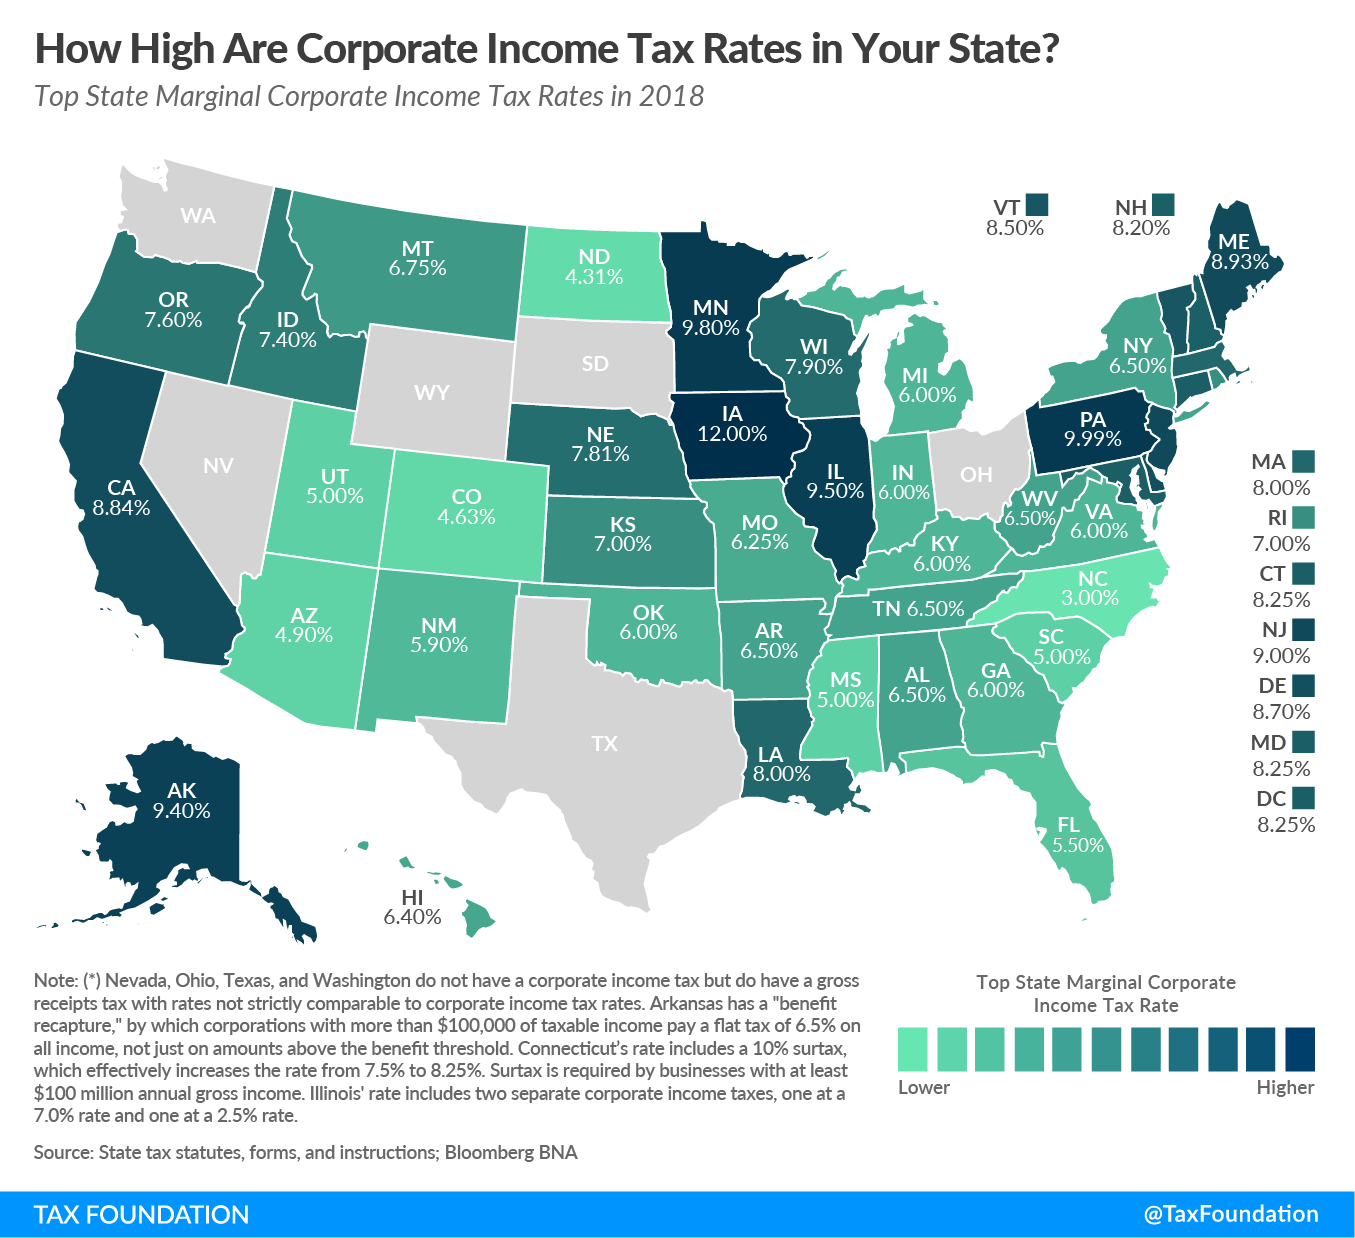 State Corporate Income Tax Rates and Brackets, 2018